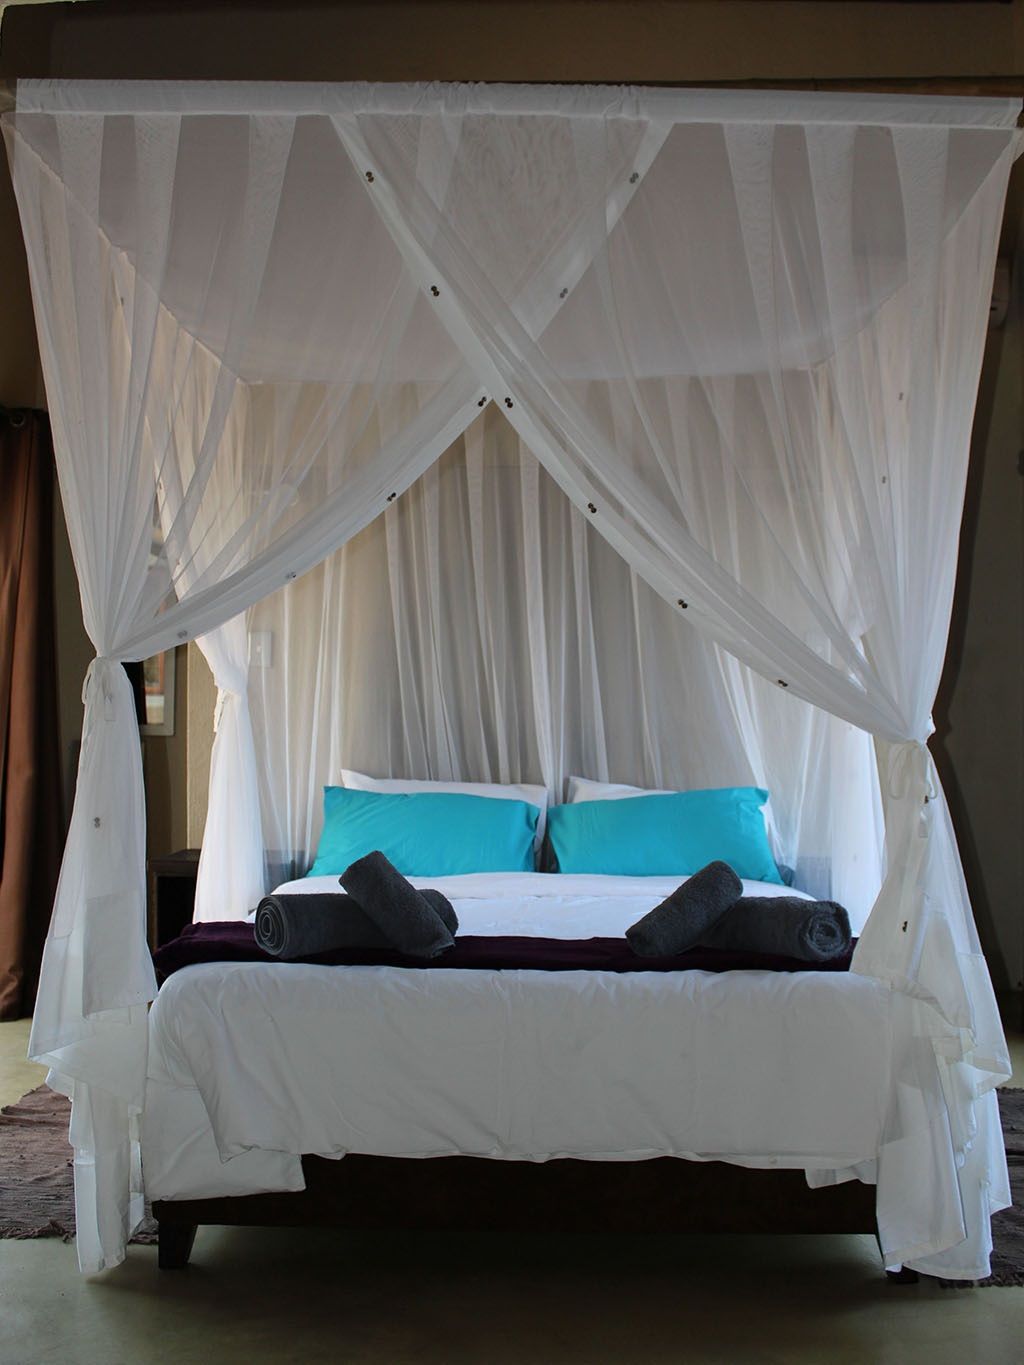 Four-poster-bed-with-white-canopy-curtains-and-turquoise-pillows